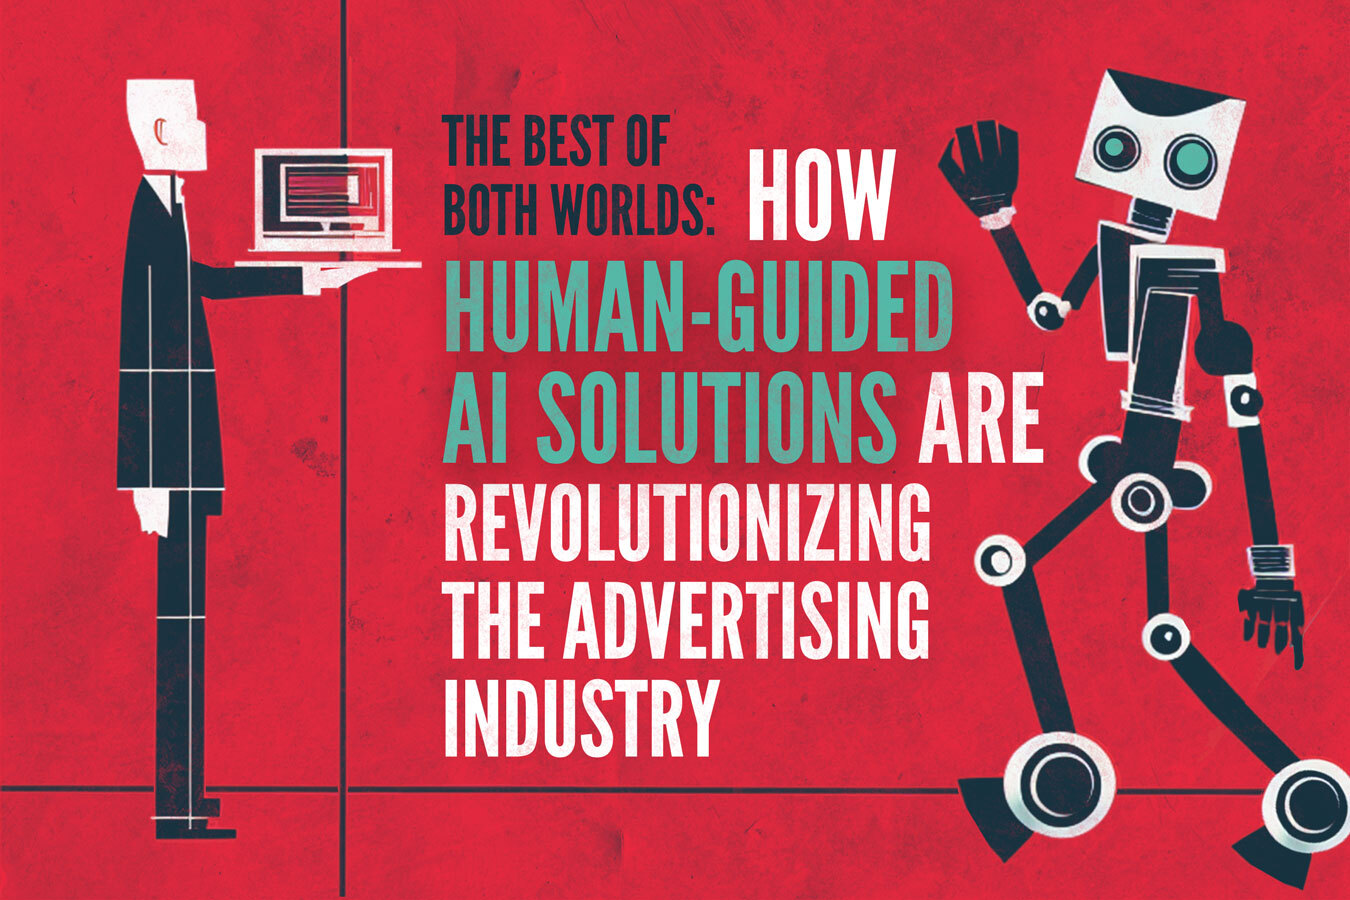 The Best of Both Worlds: How Human-Guided AI Solutions are Revolutionizing the Advertising Industry